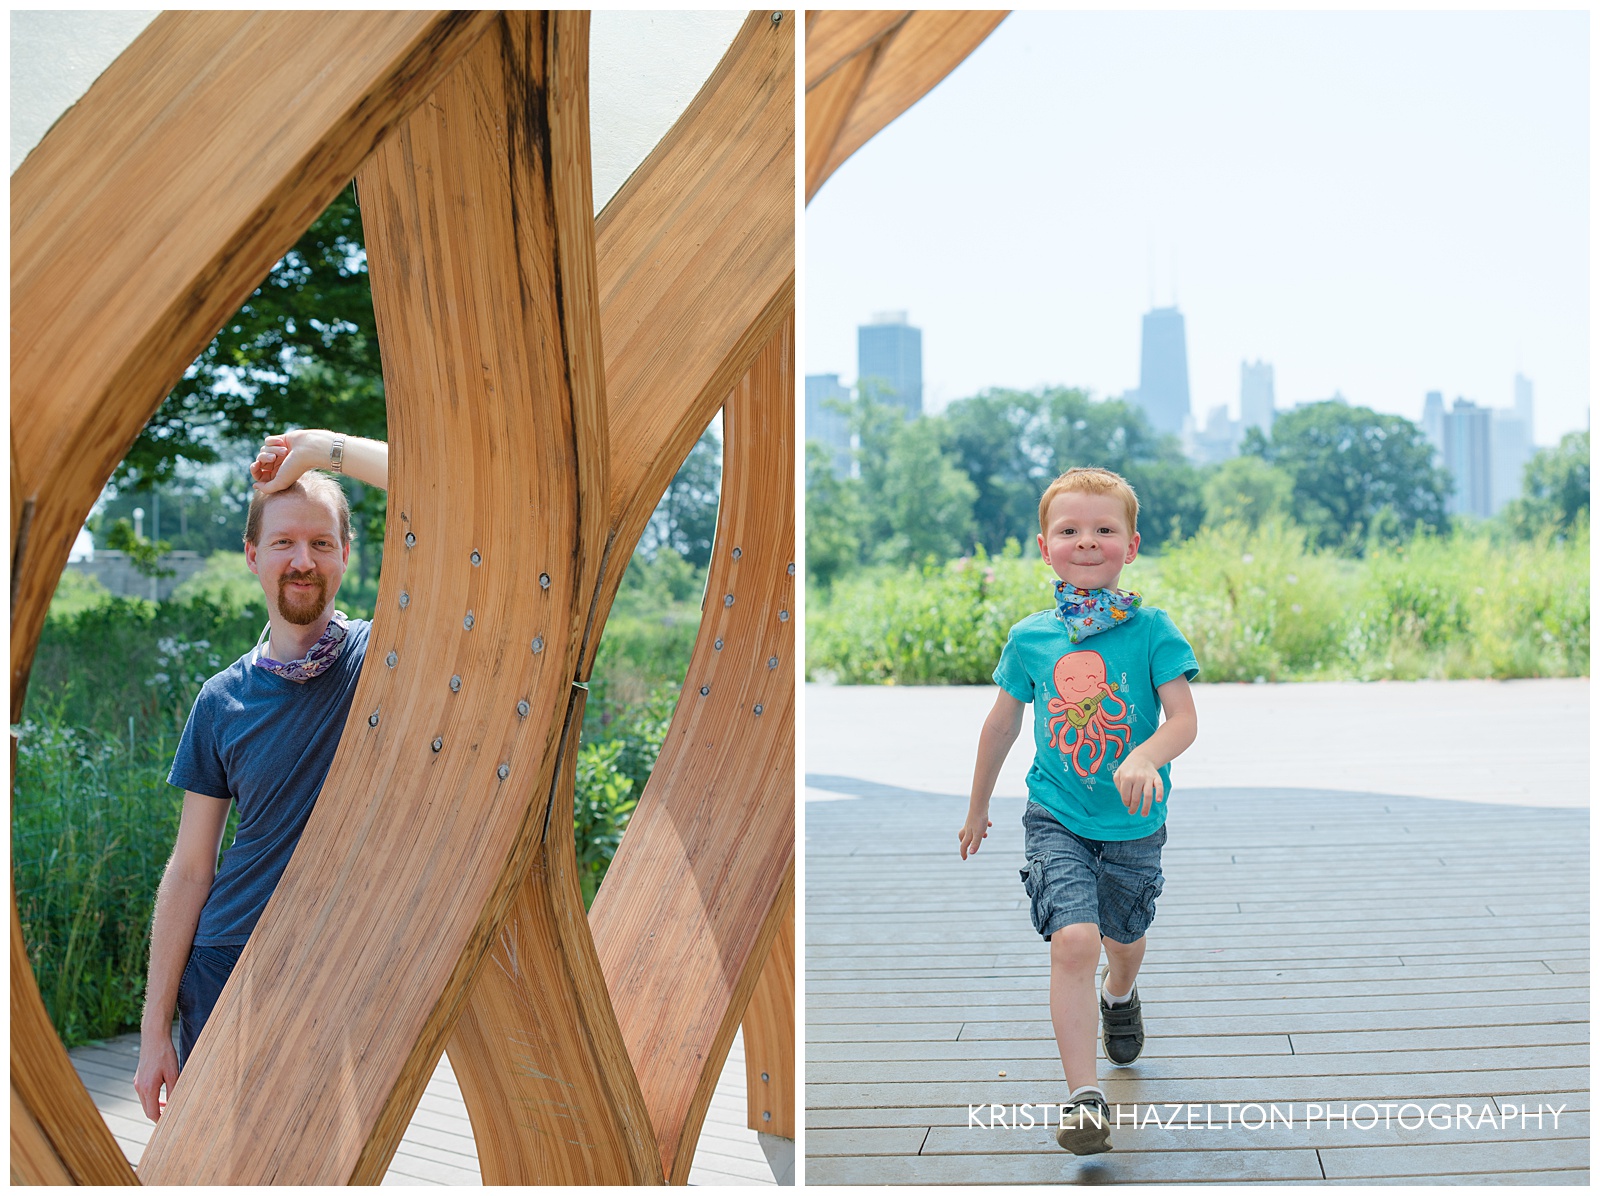 Father and son at the Honeycomb Sculpture at Lincoln Park, Chicago, IL